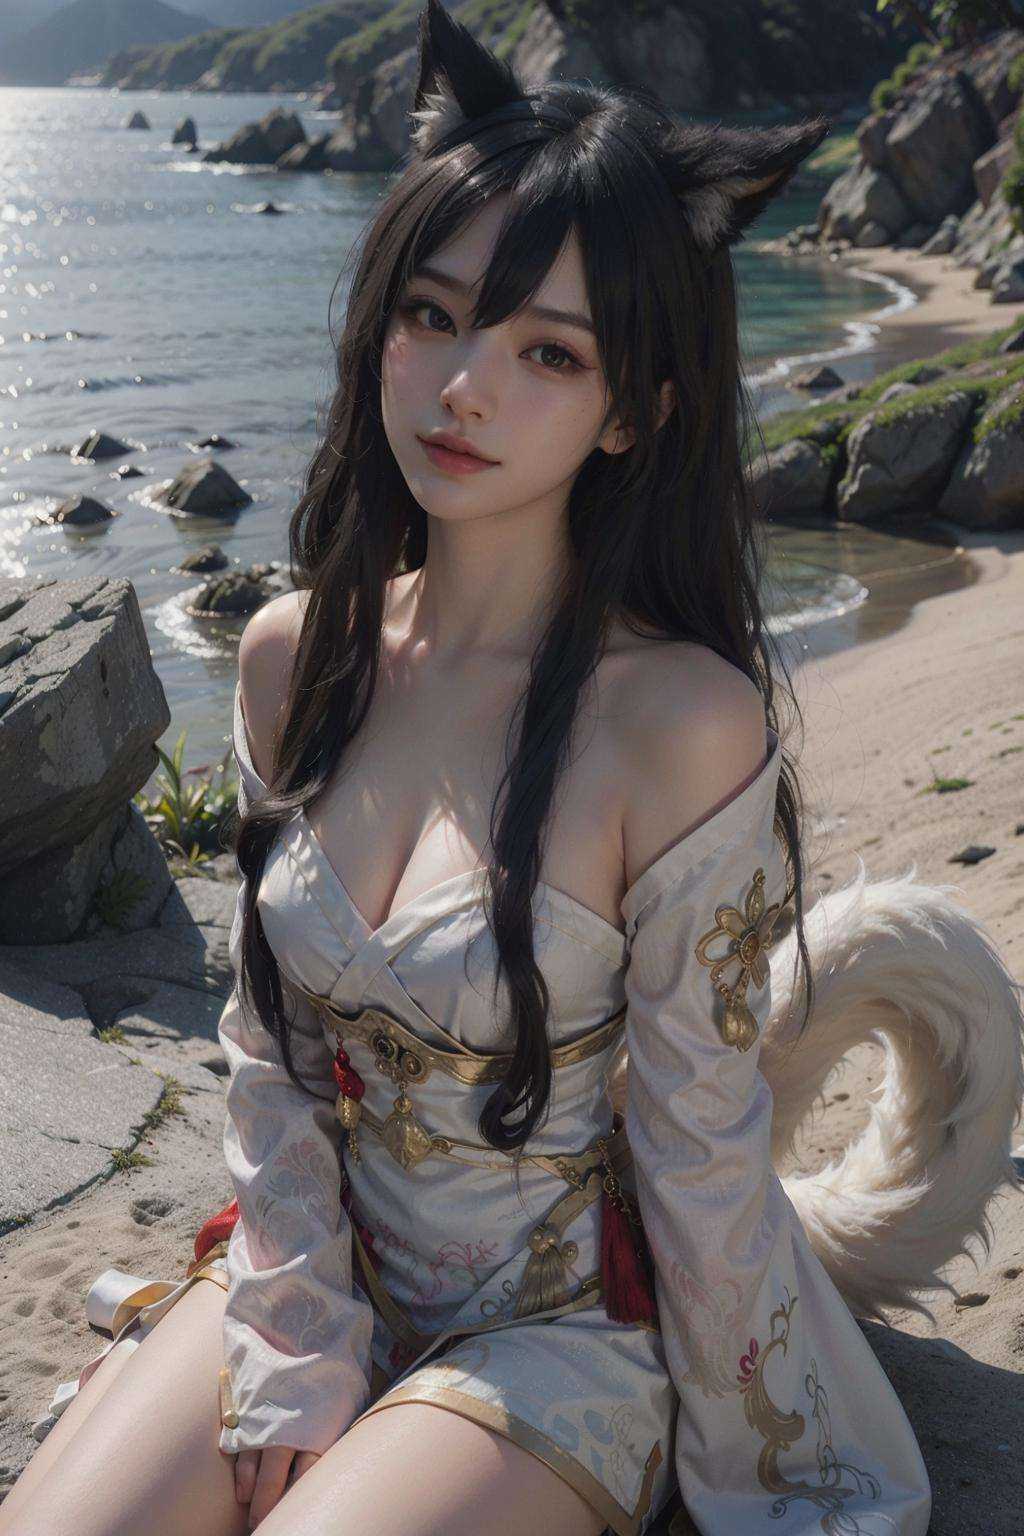 Best quality, masterpiece, ultra high res, (photorealistic:1.4), raw photo, 1girl,AHRI_COSPLAY, WHITE TAILS, BLACK LONG HAIR, YELLOW EYES, look at viewer, full body, warm smile,seaside, Golden hour makes everything warm and romantica beautiful woman, golden hour, rim lighting, warm tones, sun flare, soft shadows, vibrant colors, hazy glow, painterly effect, dreamy atmosphere<lora:80s Japan 2:0.4:PALETTE> <lora:OC:0.5:BODY0.5> <lora:Ahri_Cosplay:1> <lora:epiNoiseoffset_v2:0.5>  <lora:better-bg-002:0.3:KEEPBG>